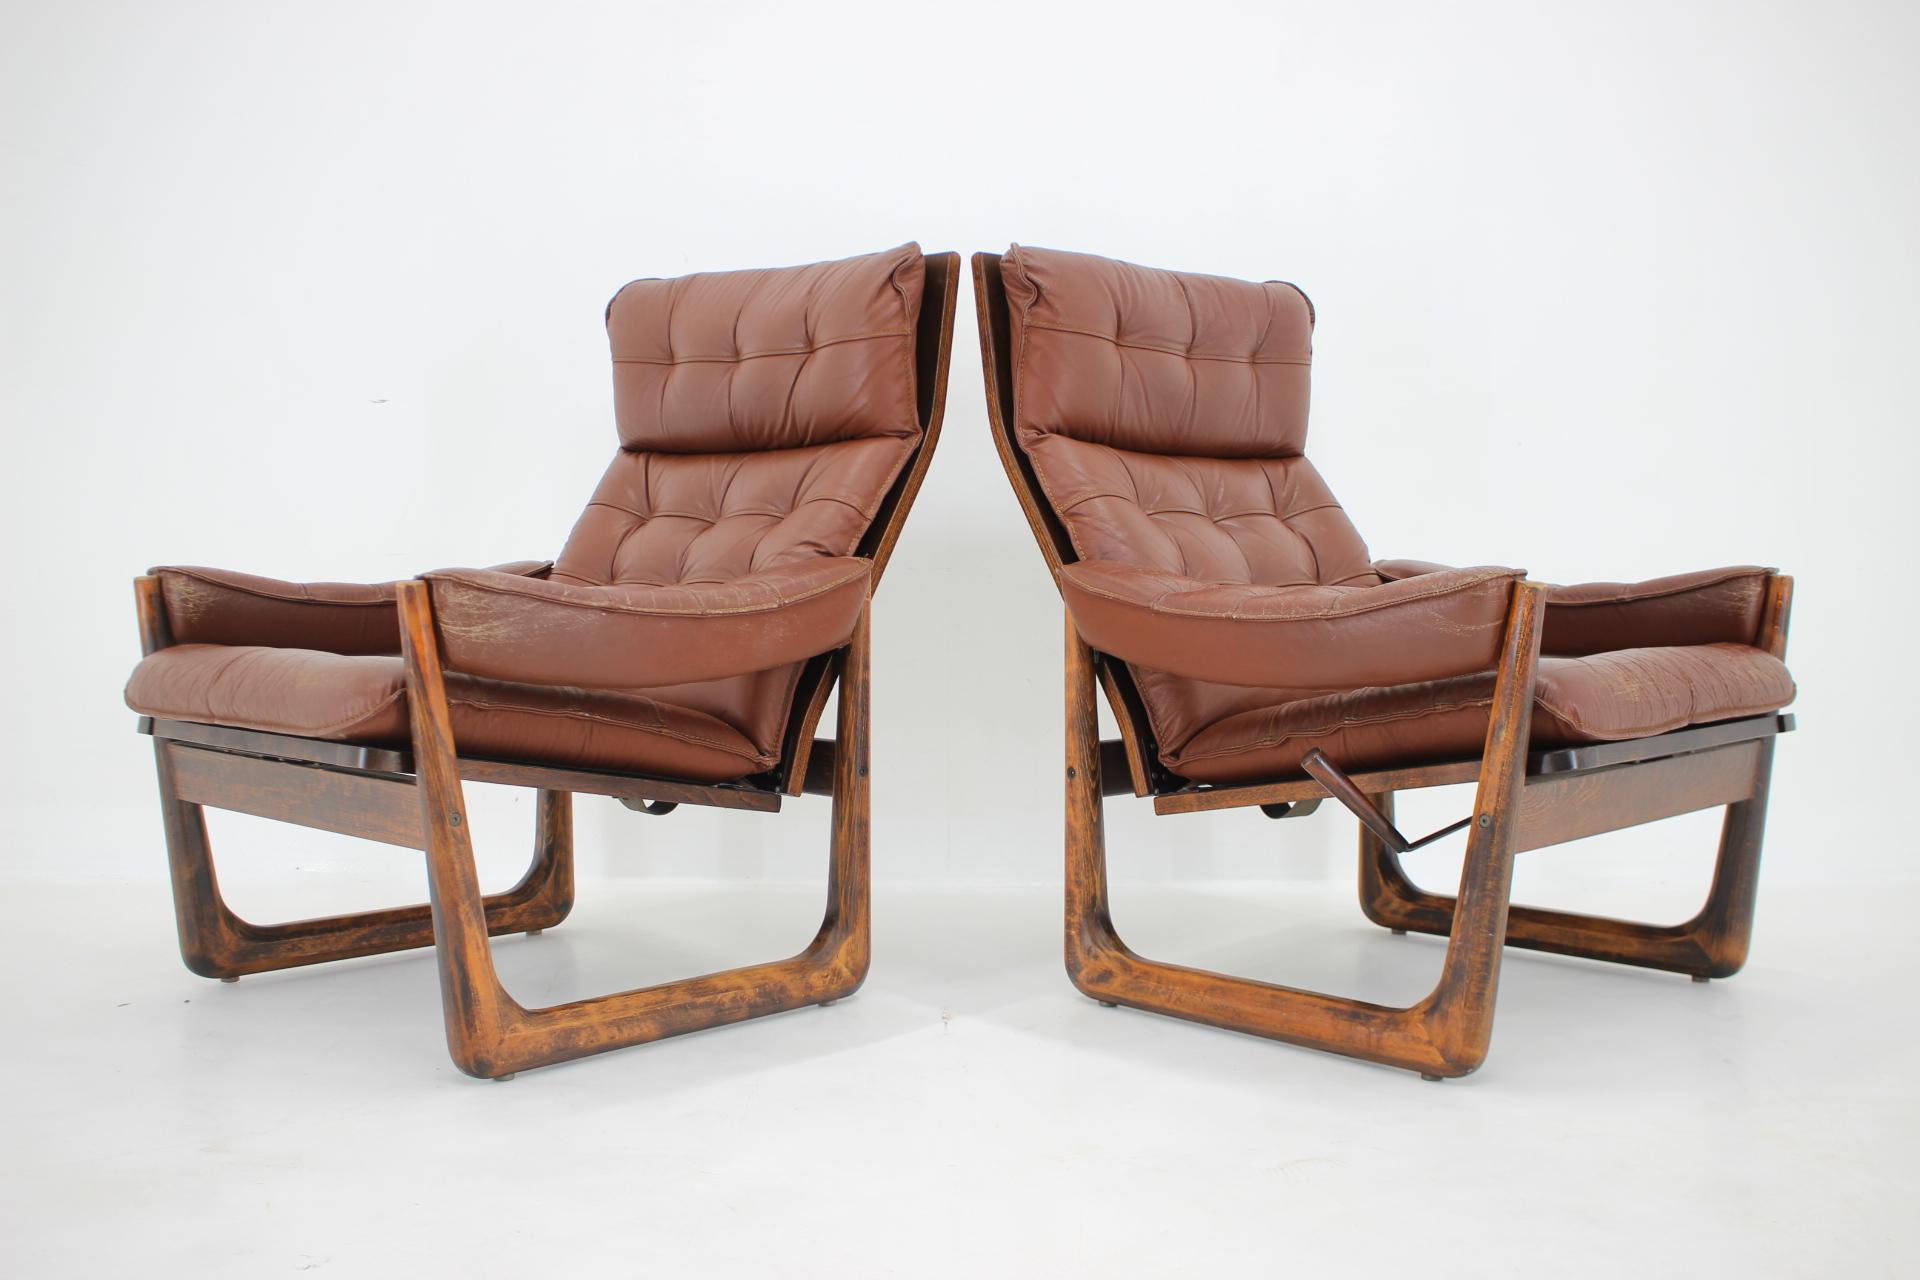 1960s Pair of Leather Adjustable Armchairs by Genega Mobler, Denmark 4